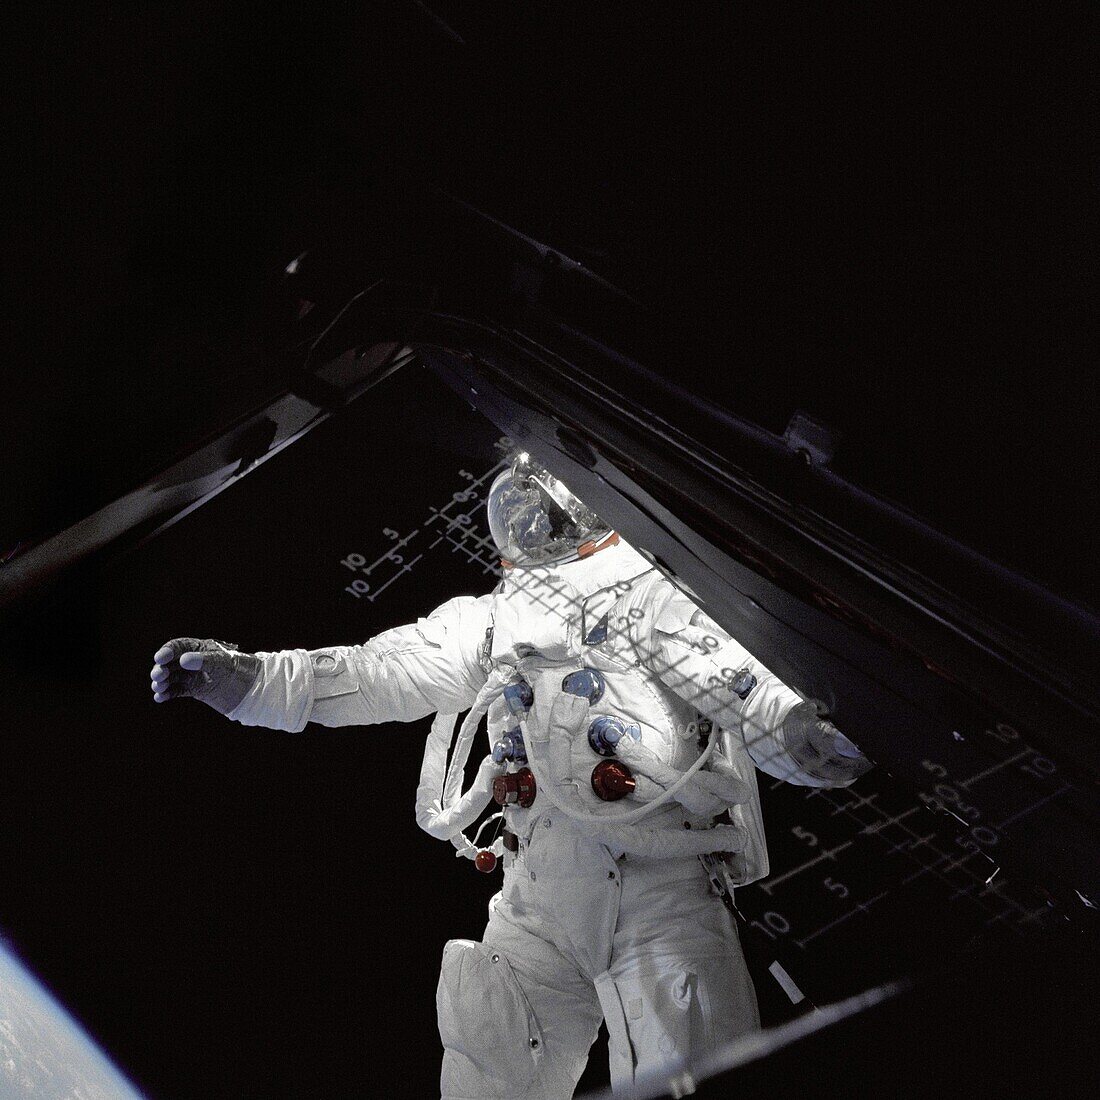 Astronaut Russell Schweickart, lunar module pilot, stands on the module´s deck during his spacewalk on the fourth day of the Apollo 9 mission  This photograph was taken from inside the lunar module ´Spider´ by mission commander James McDivitt   Apollo 9 w